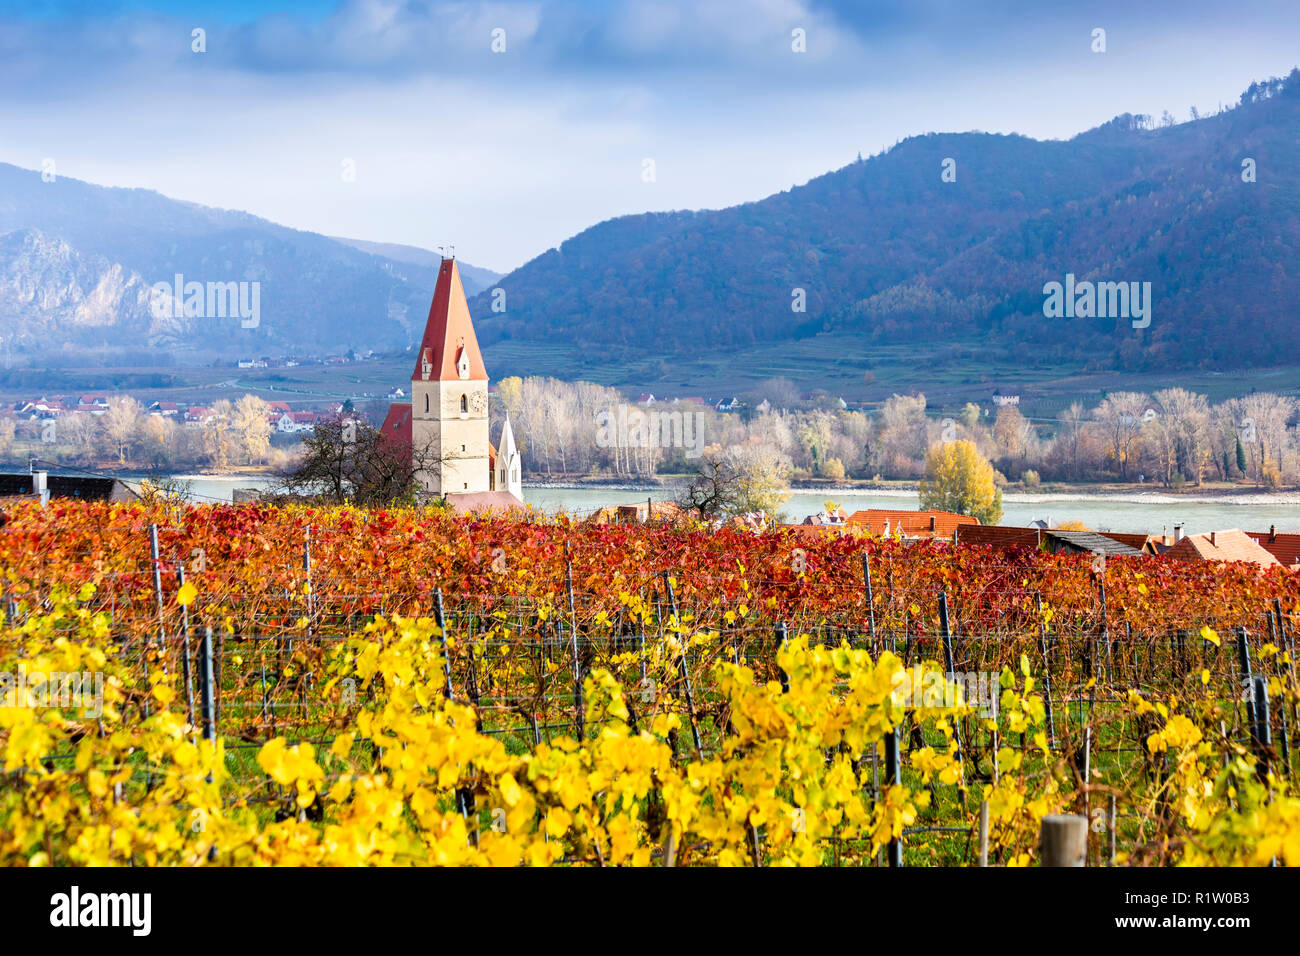 Weissenkirchen. Wachau valley. Lower Austria. Autumn colored leaves and vineyards on a sunny day. Stock Photo